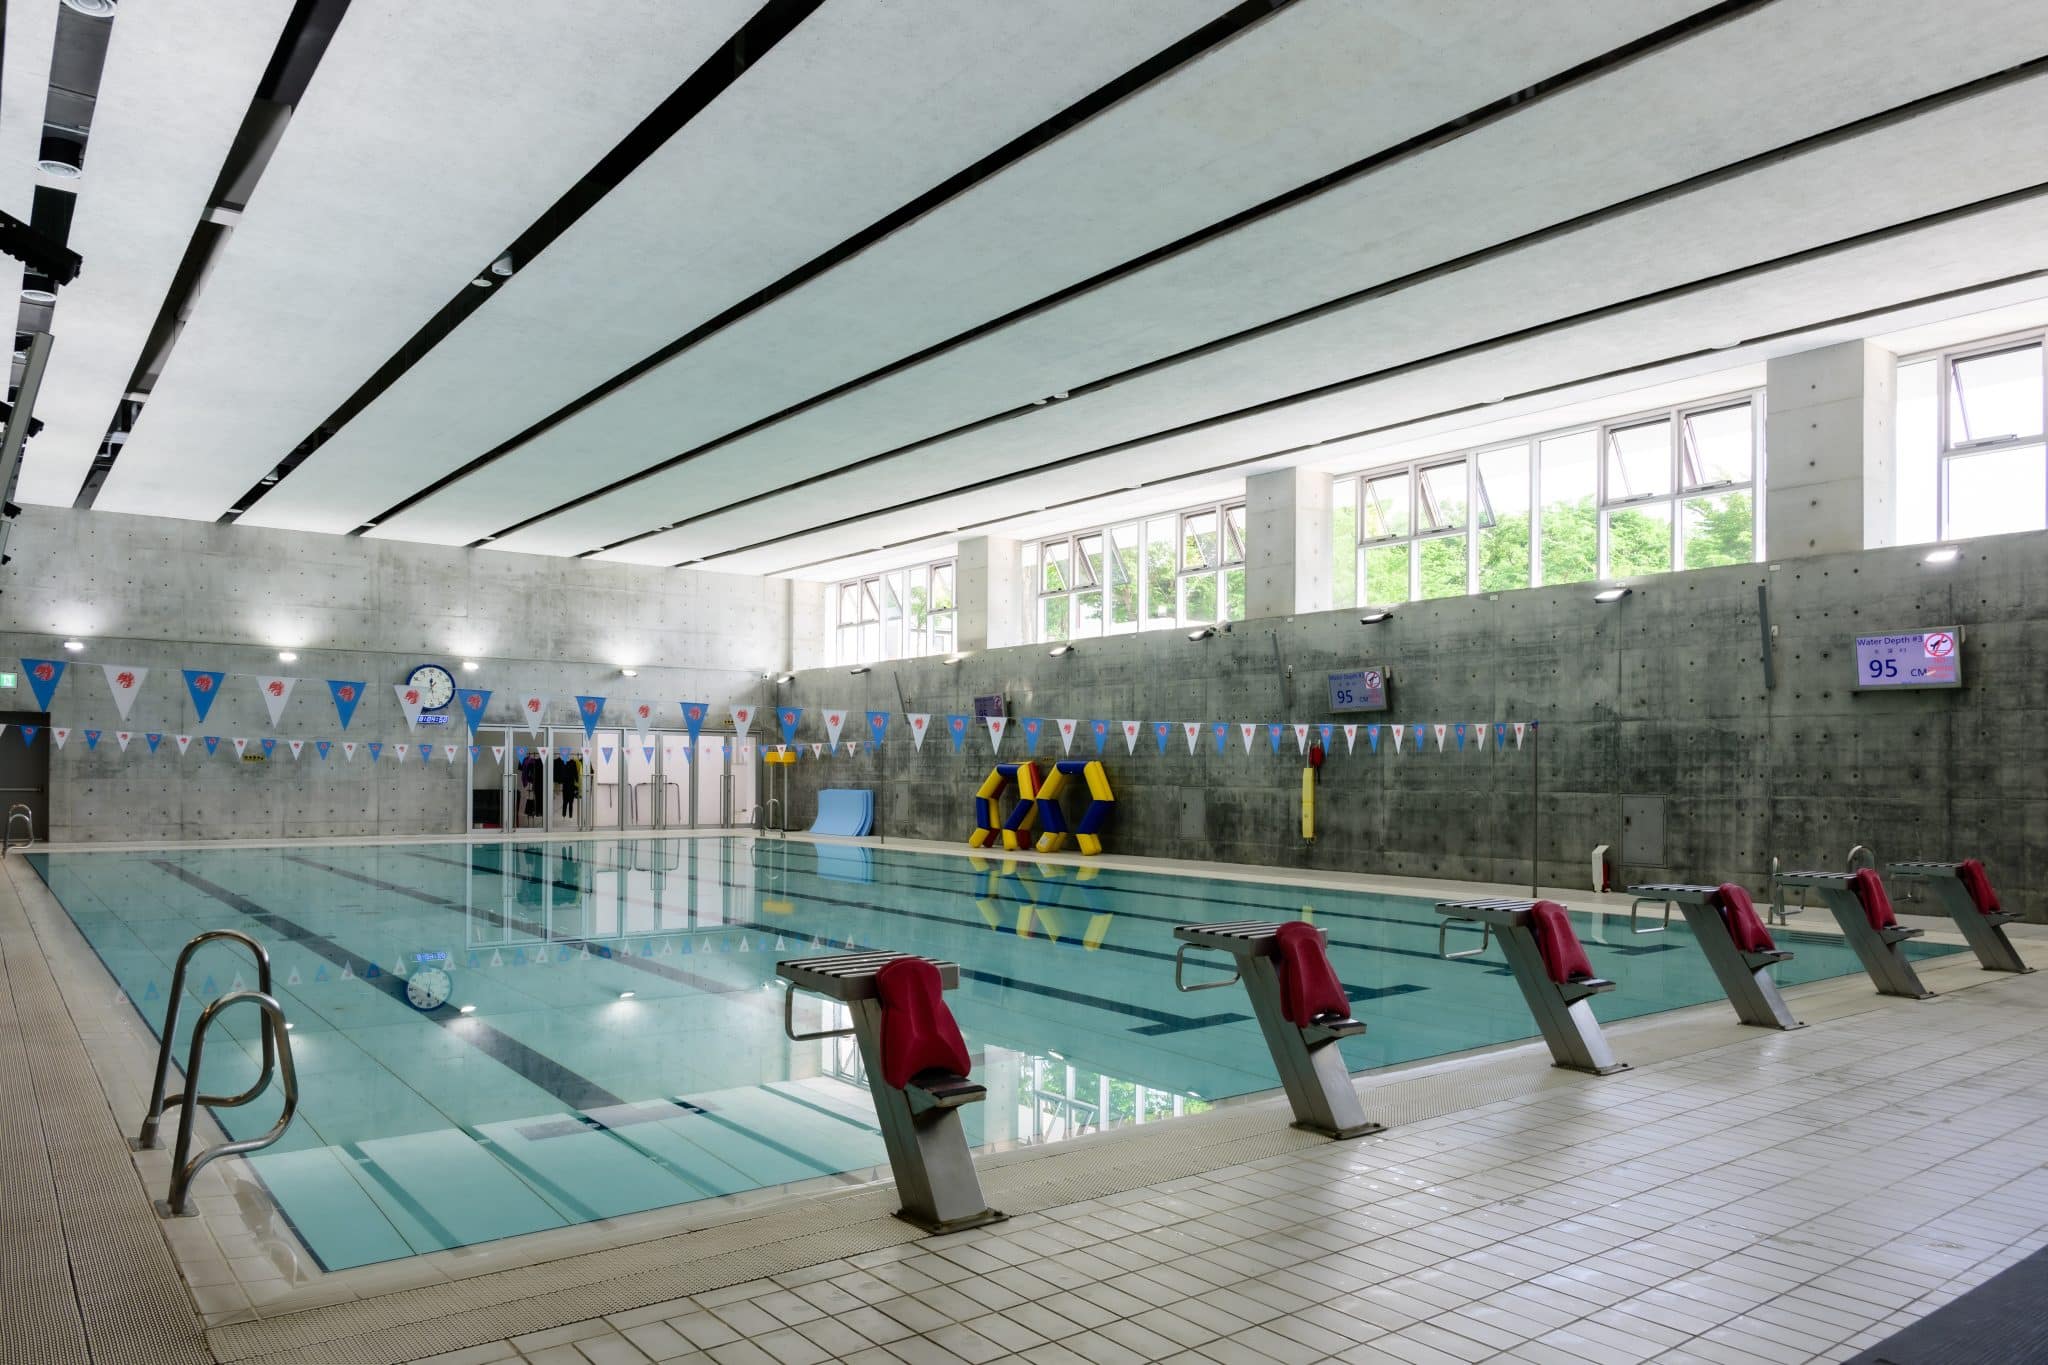 The athletic complex includes a 6-lane, adjustable depth saltwater swimming pool, full-size basketball court, soccer field, gym, and dance studio.